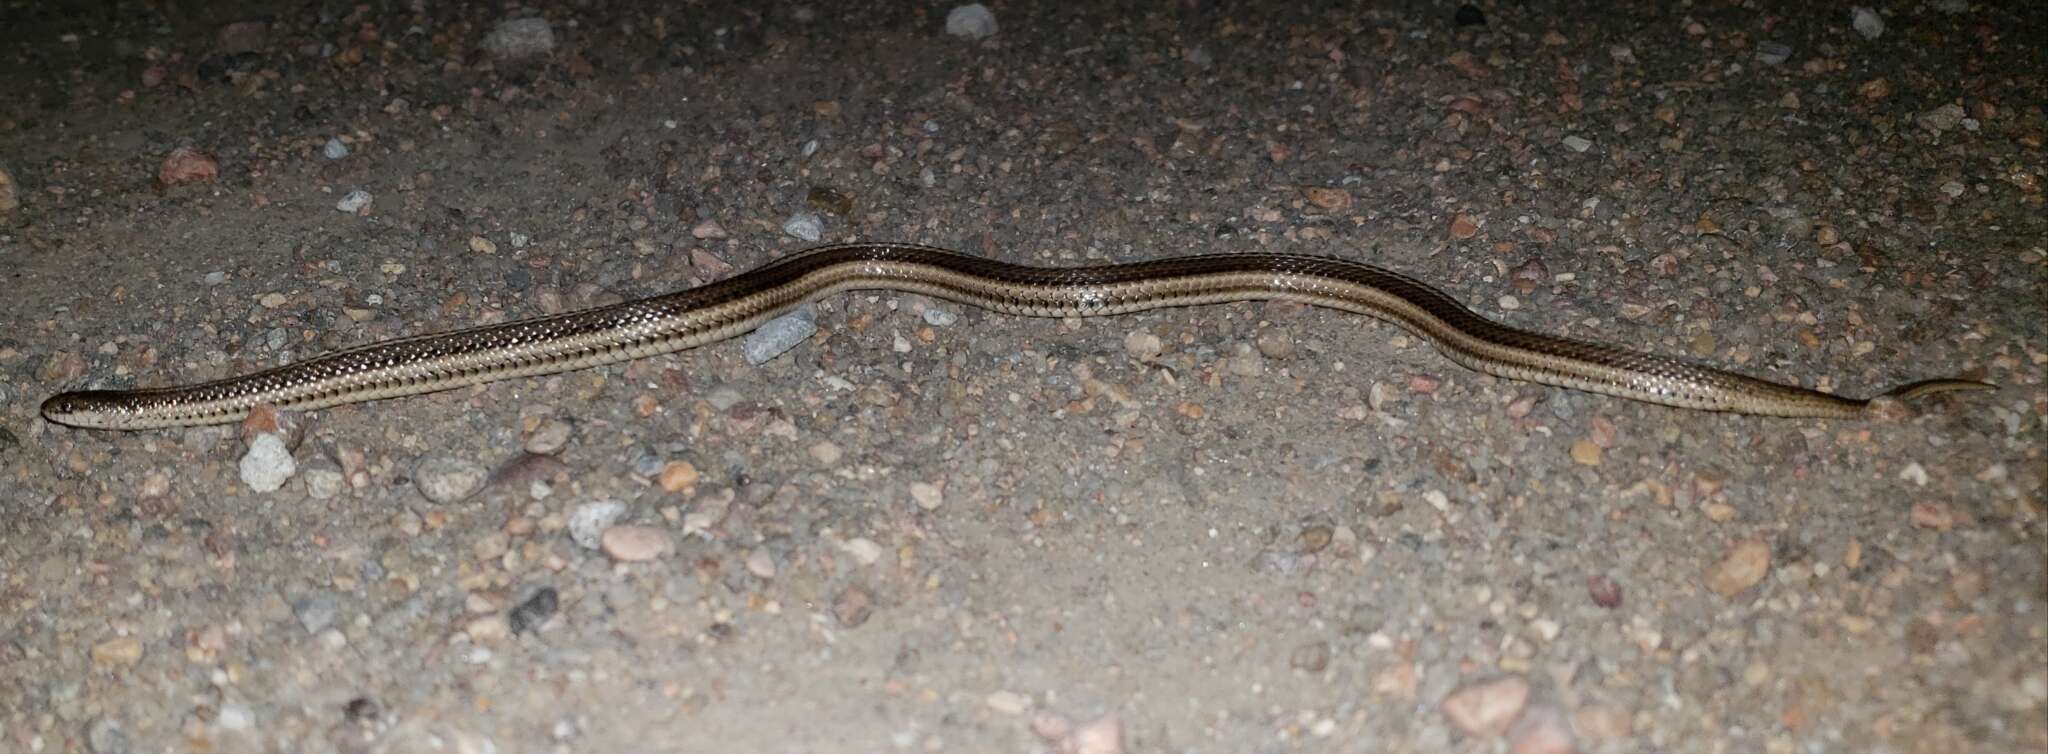 Image of Lined Snake